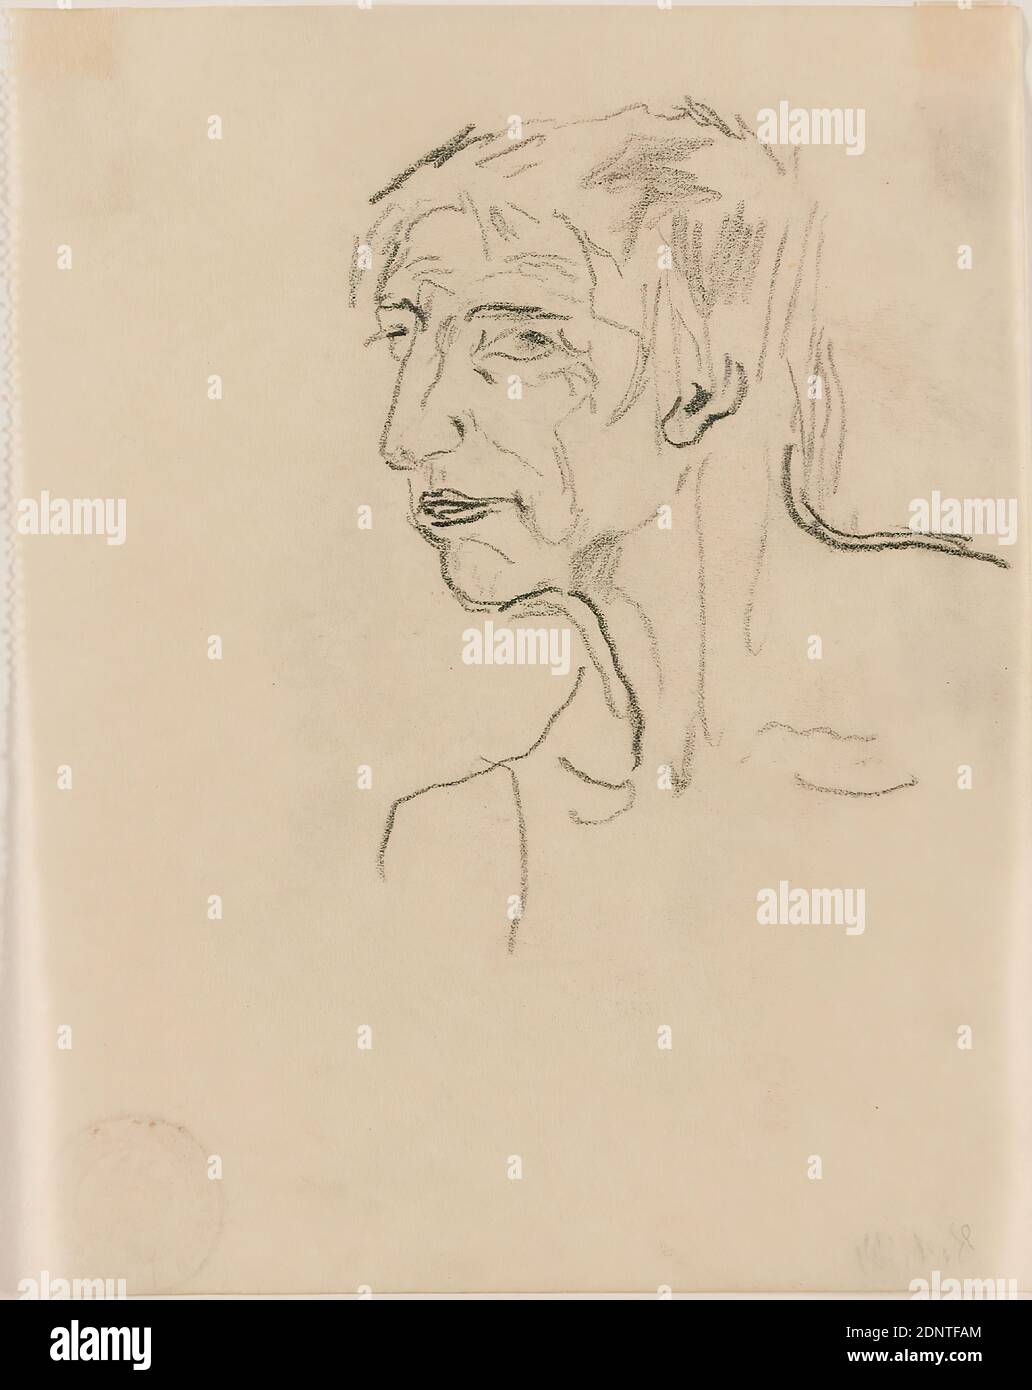 Gustav Heinrich Wolff, portrait study, pencil, vellum, drawing, pencil on vellum, total: height: 14,5 cm; width: 11,4 cm, verso lower left (by someone else? ) dated in pencil: 8.1.34, drawing, graphics, Sketches, Old Woman, Portrait, Classical Modernism, Portrait Study of an Elderly Person in Half-Profile to the Left, from the Sketchbook 1932-34 Stock Photo